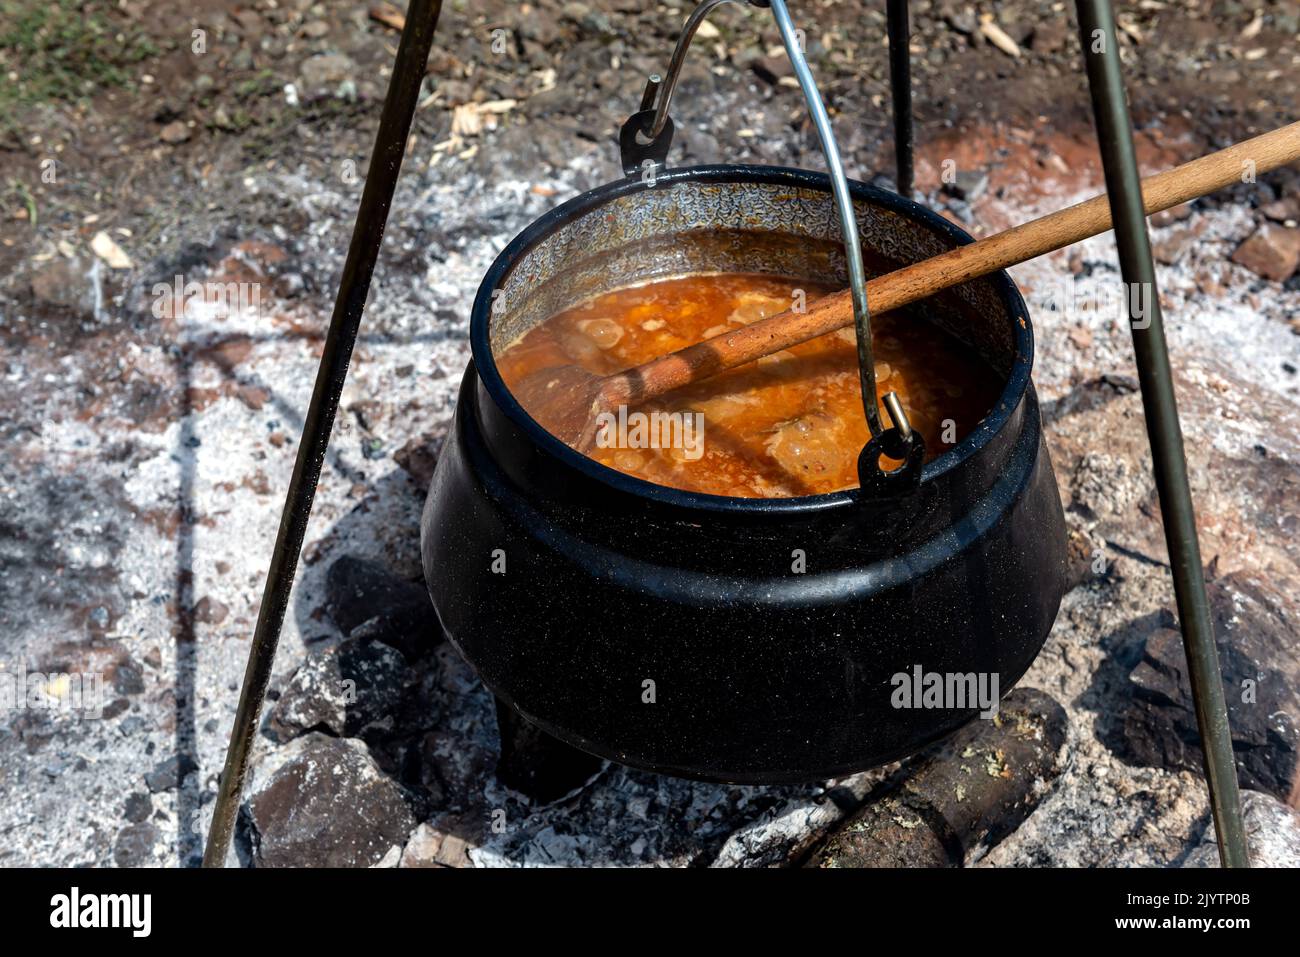 Stew Pot Outdoor Goulash In It Stock Photo, Picture and Royalty